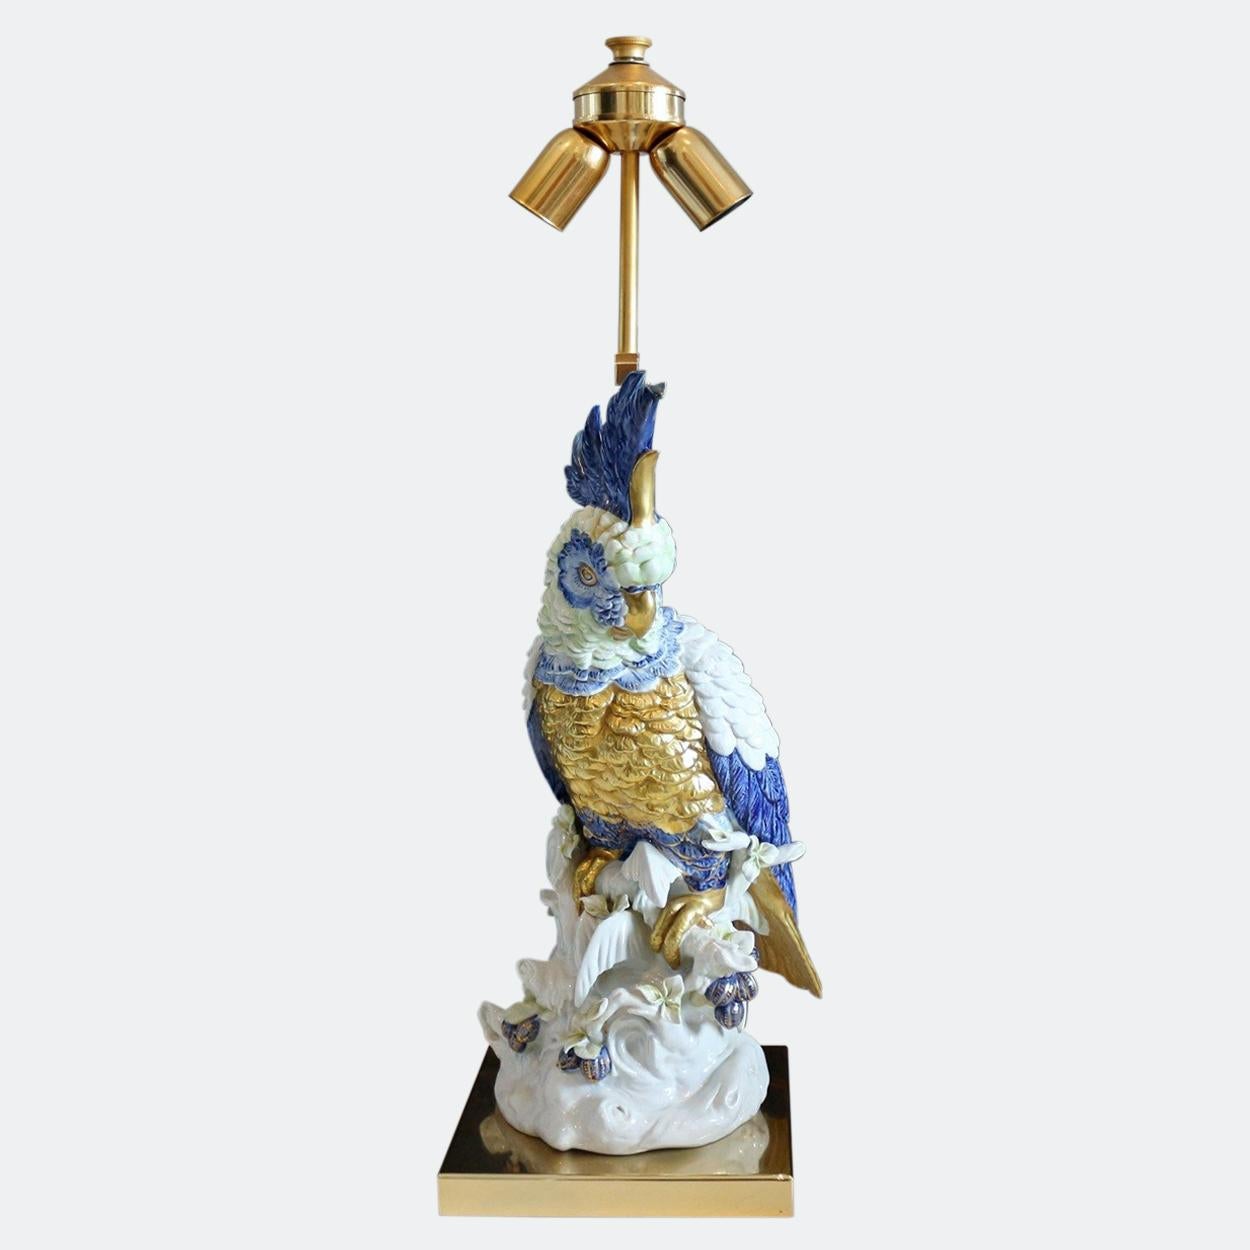 Large lamp from Italy, porcelain cockatoo mounted on a polished brass frame, the height is variable, with original shade from 83 cm to 96 cm, the shade is 52 cm wide and has the sewn-in label on the inside. Height bird 47 cm. Base plate 20 cm. 

I